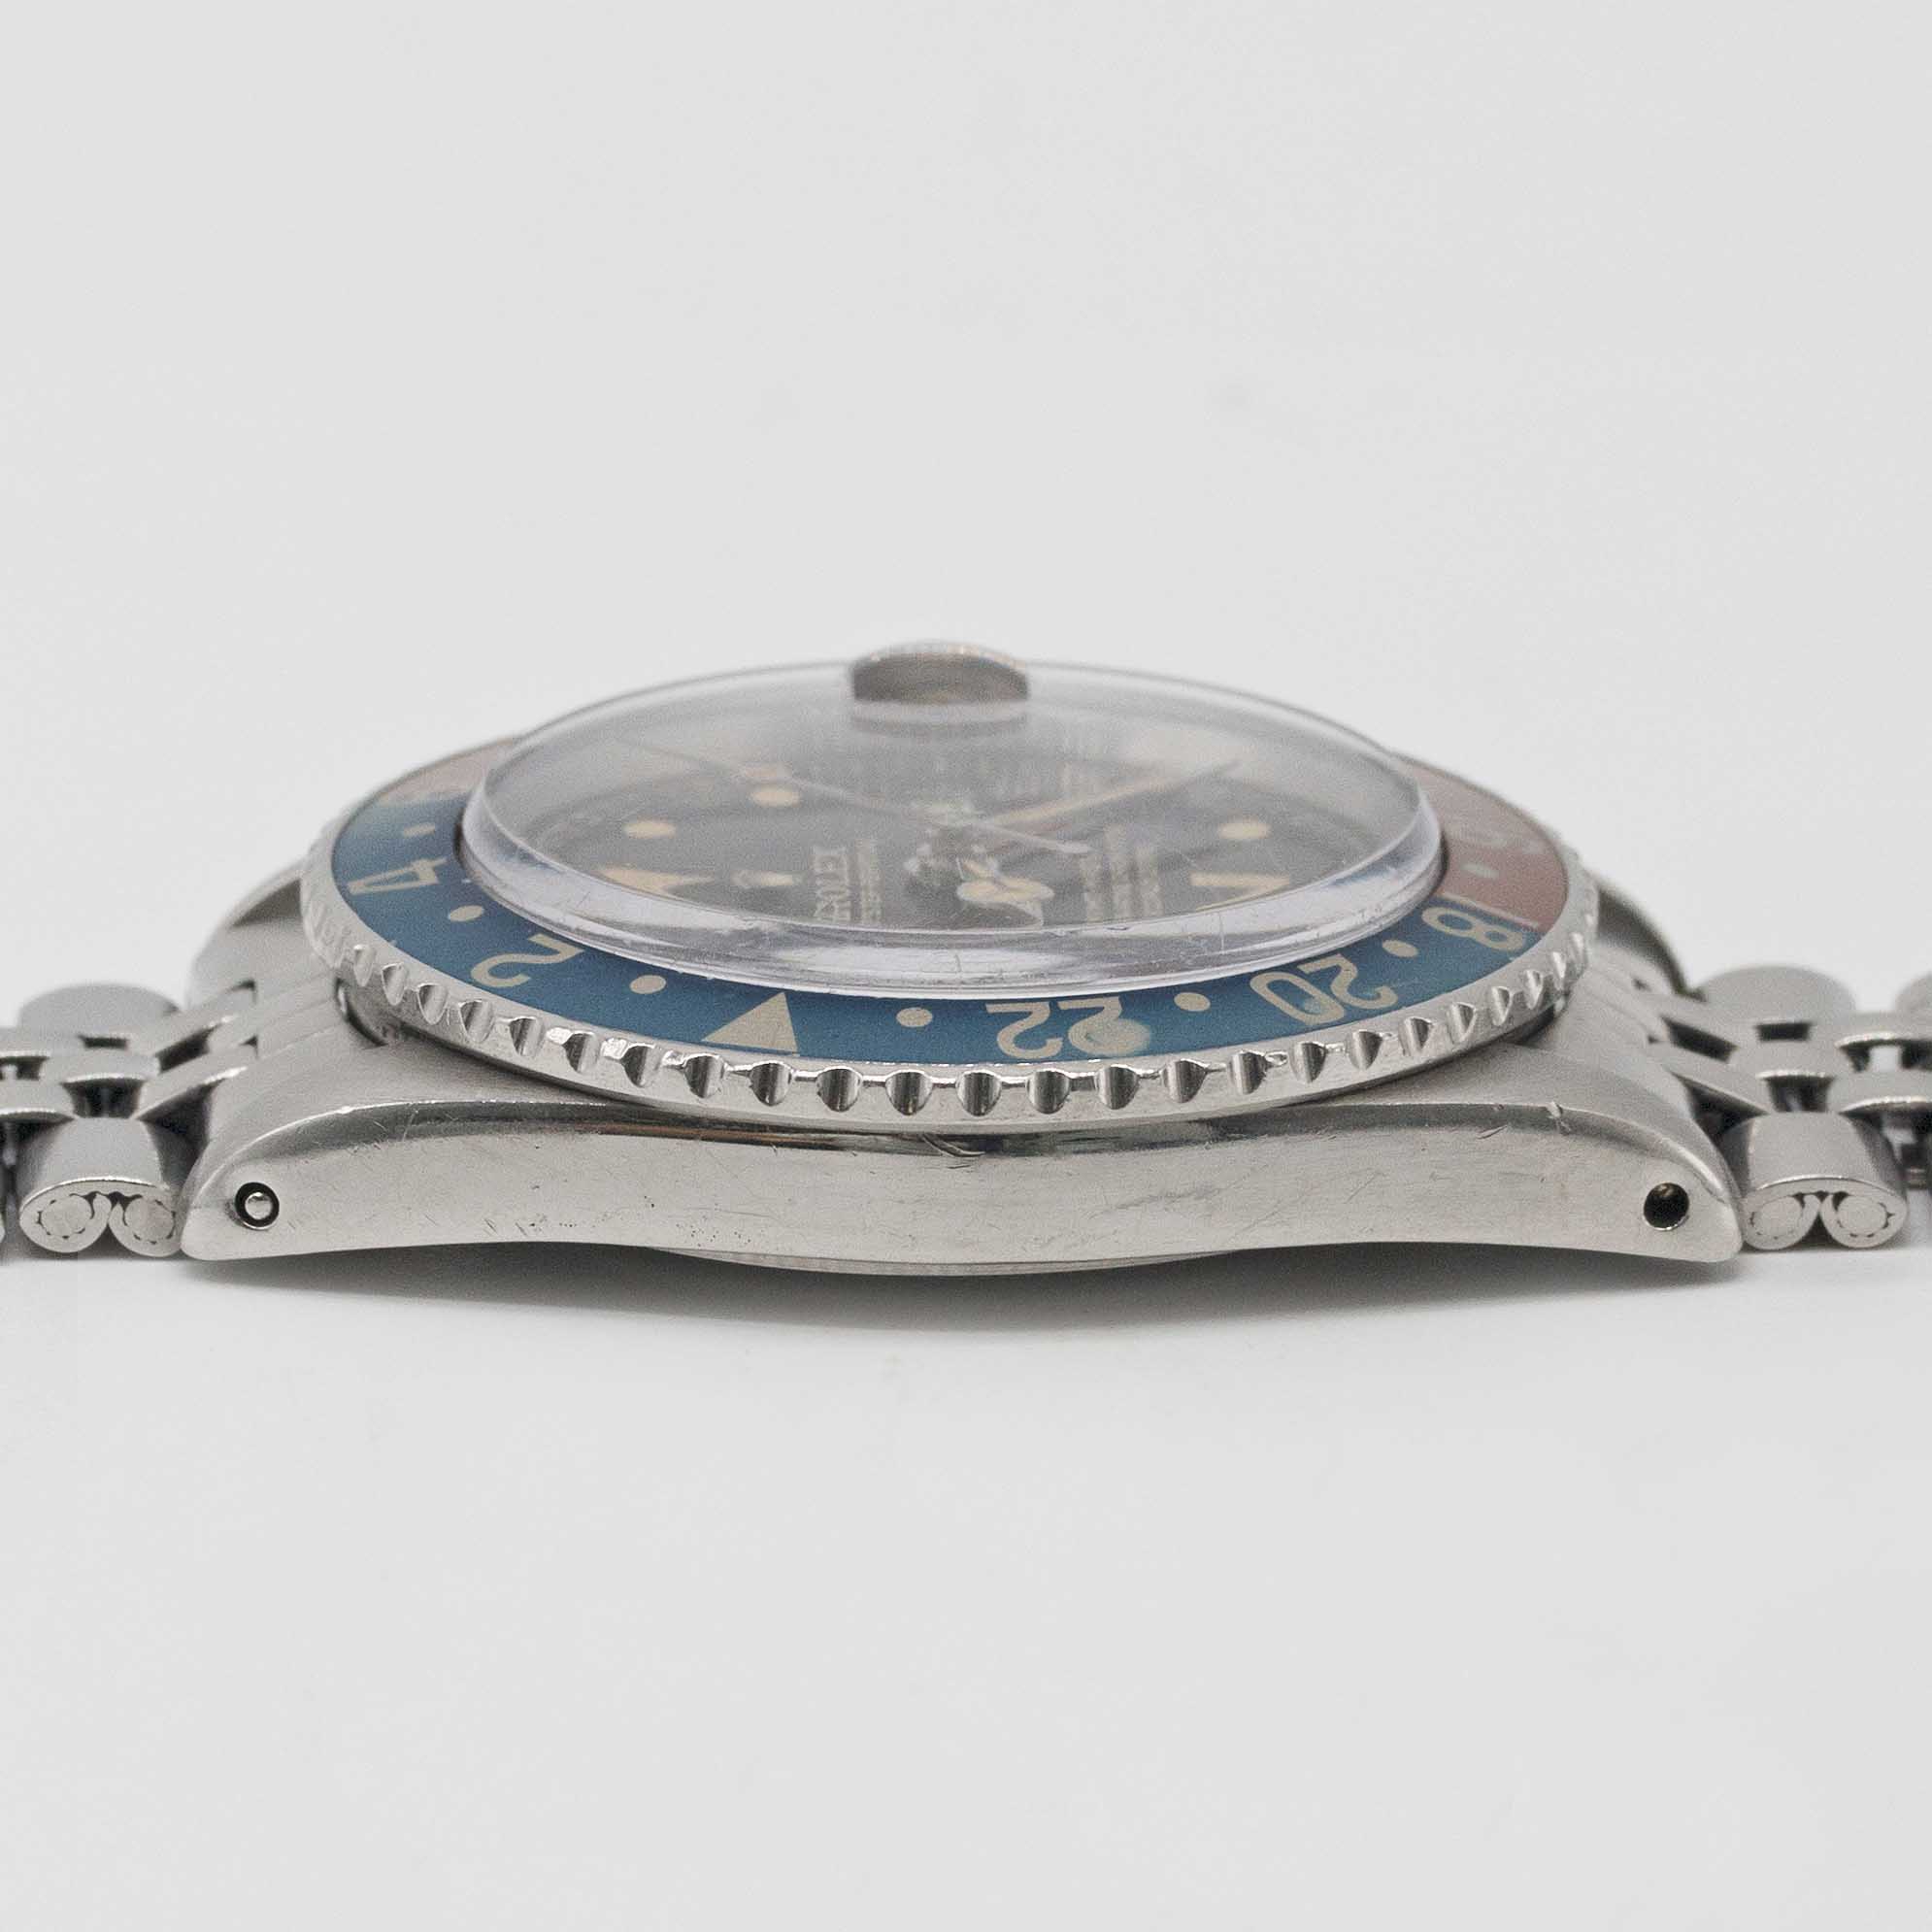 A RARE GENTLEMAN'S STAINLESS STEEL ROLEX OYSTER PERPETUAL GMT MASTER BRACELET WATCH CIRCA 1961, REF. - Image 11 of 11